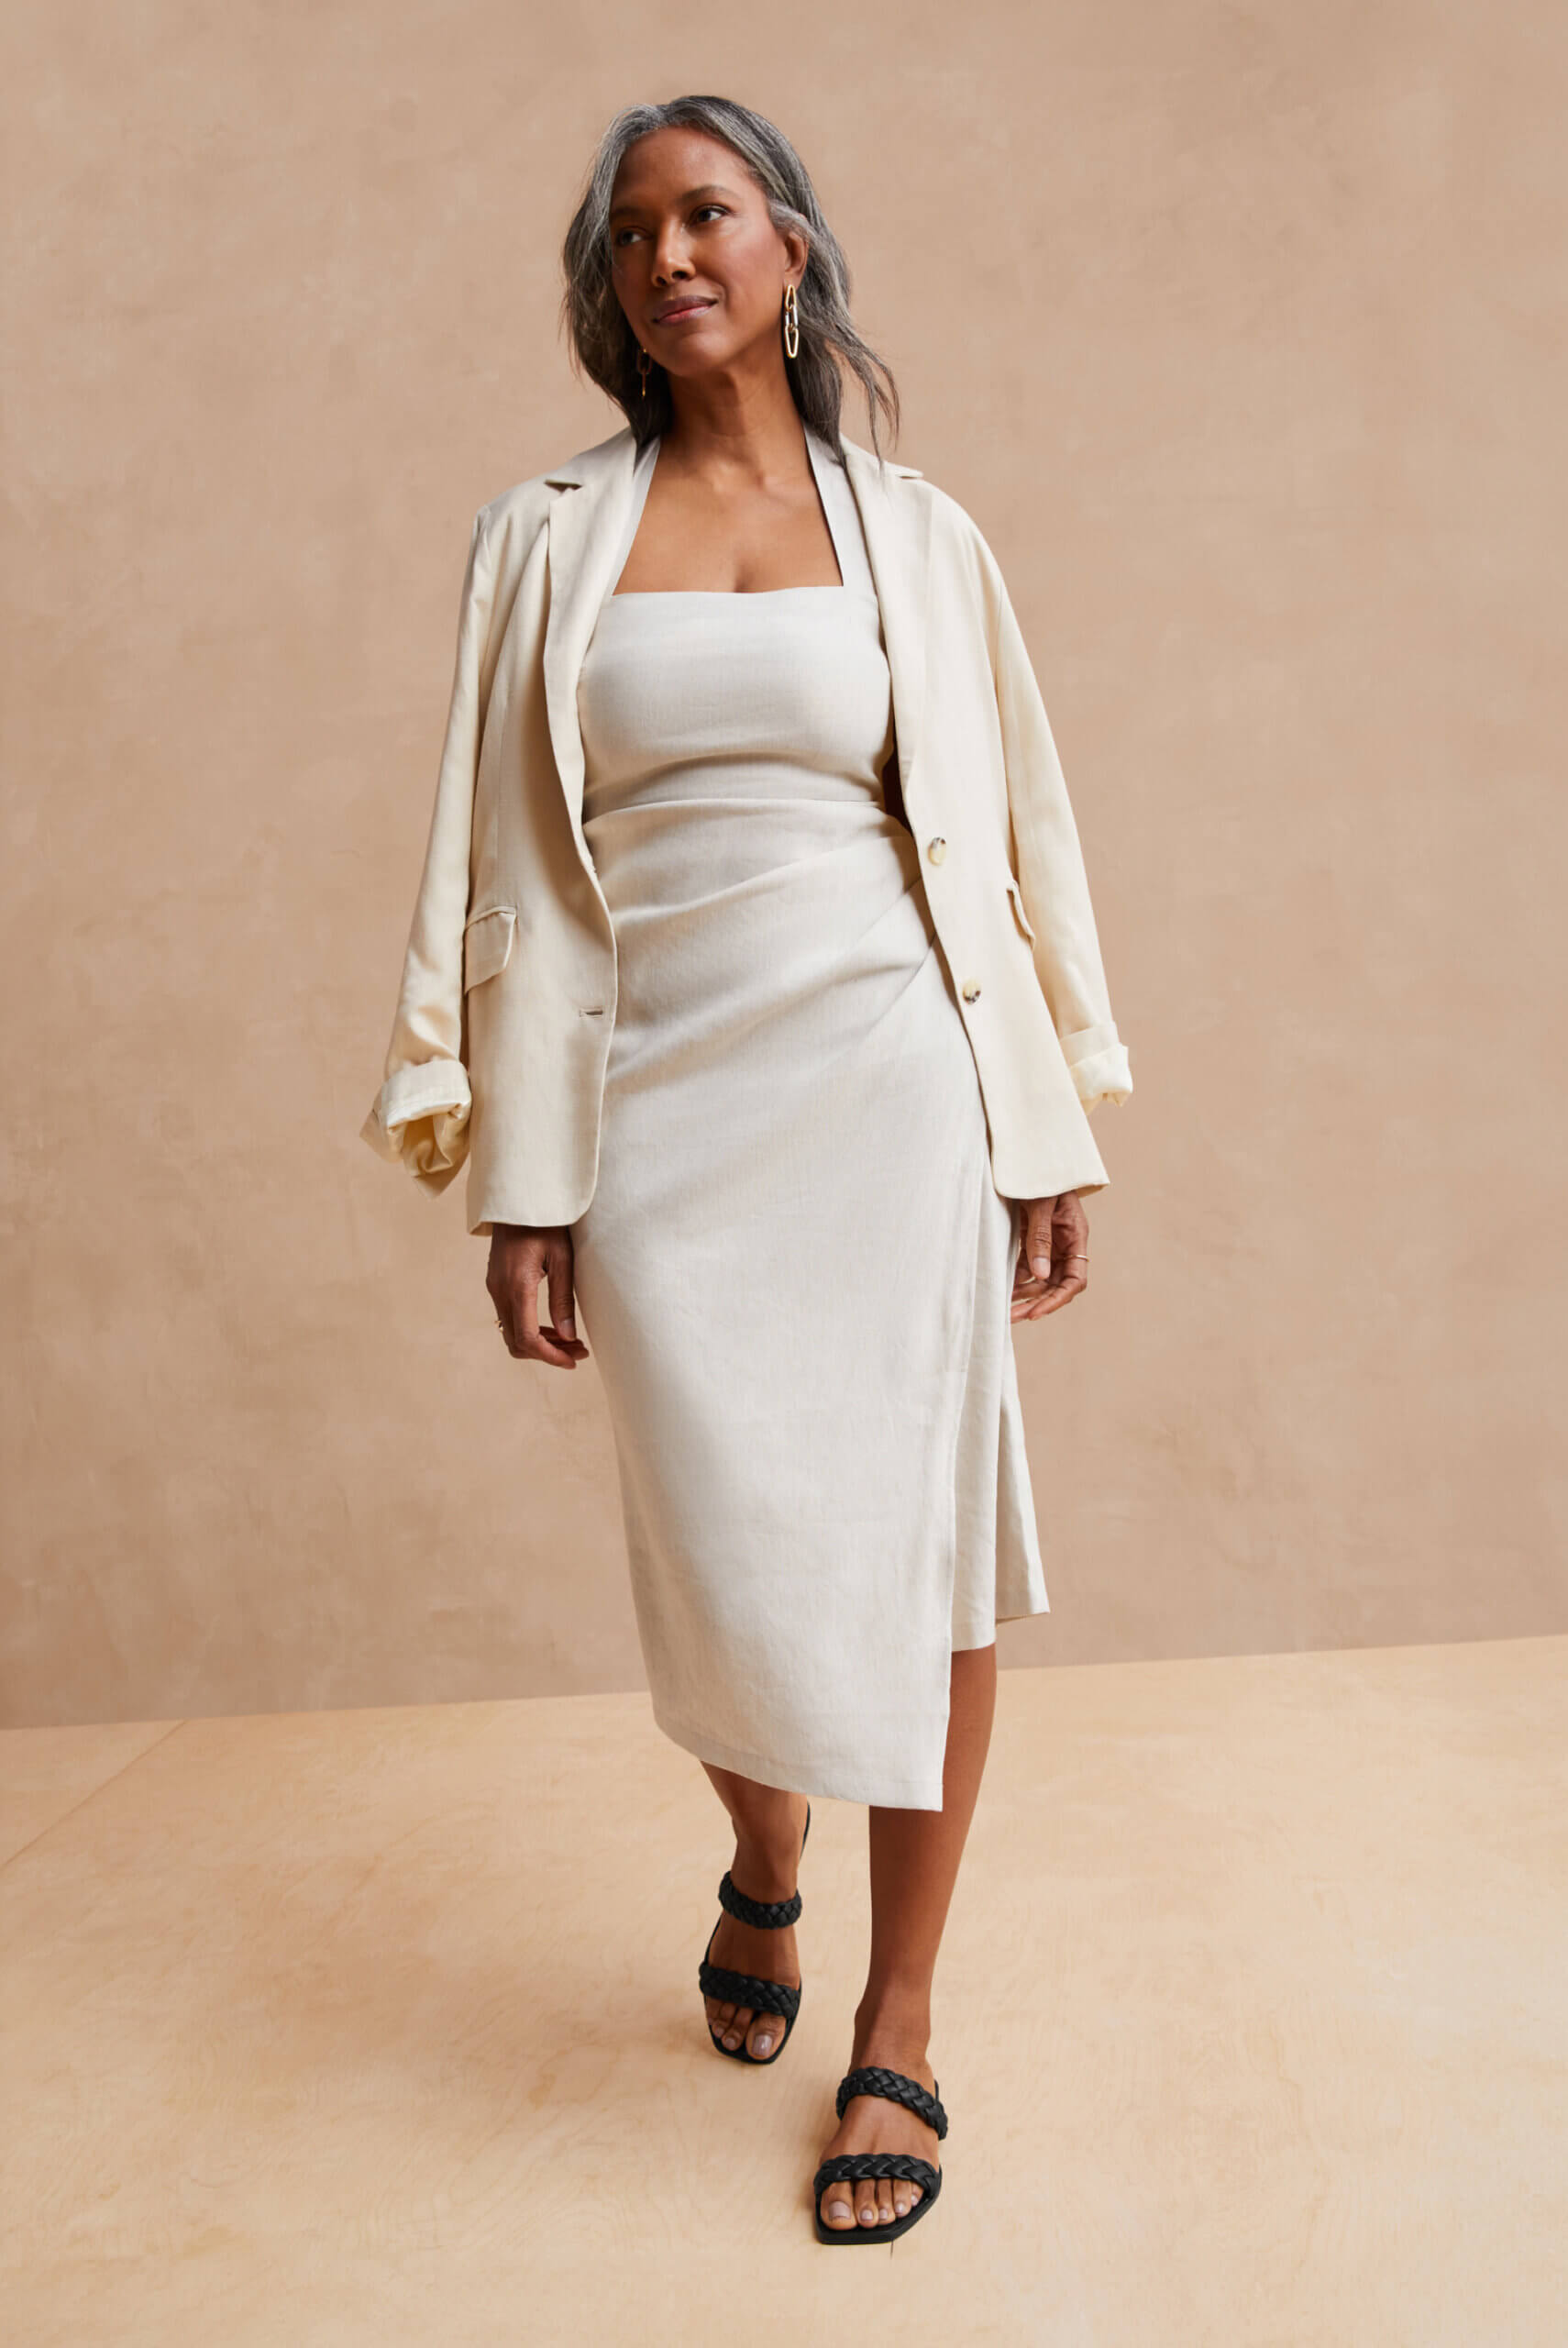 Black woman standing and wearing long white dress, cream blazer and black sandals.  